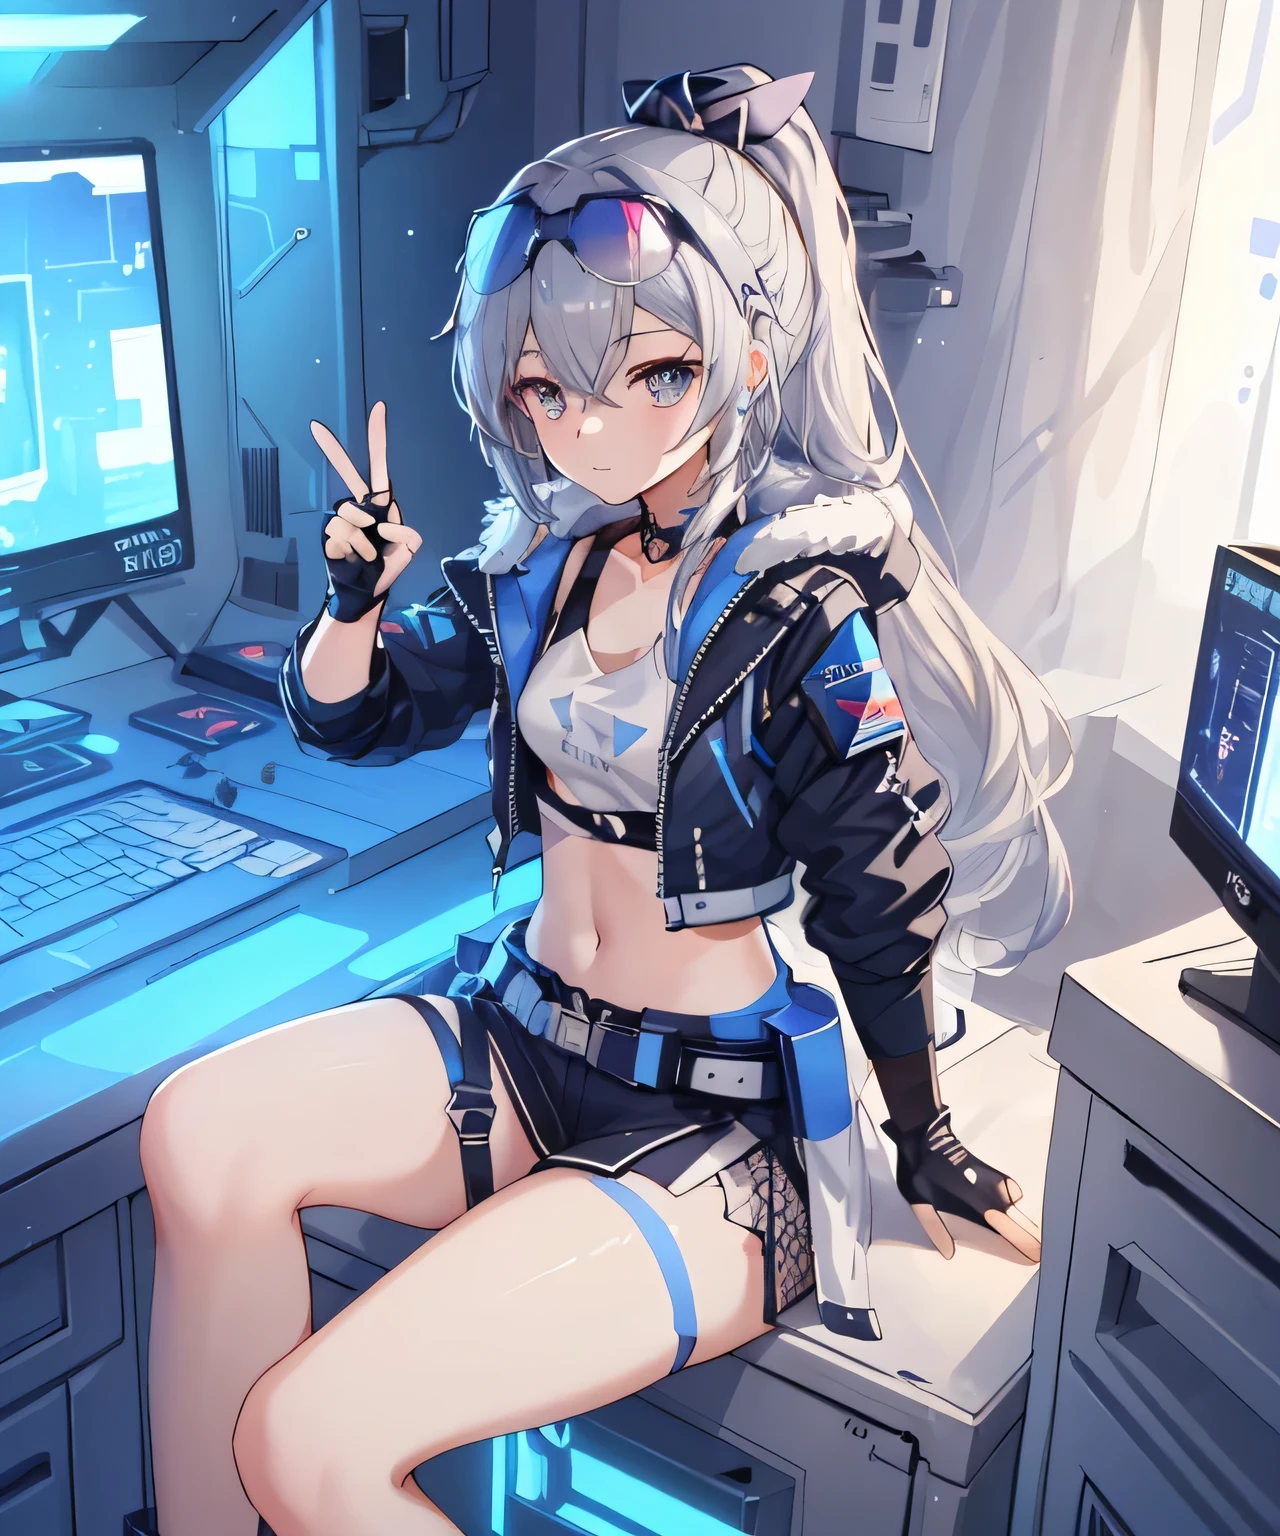 (masterpiece, lifelike,best quality, Extremely detailed CG,beautiful and delicate eyes,super detailed,intricate details,from above),whole body,1 girl,young,13 years old,young,long hair,Metal wool,white hair,high bone tail,Moderate,navel,silver eyes,giggle,((peace sign,sitting,),crown,Wearing blue sunglasses,fingerless gloves,cyberpunk jacket),Detailed background((space station,Fluorescent blue light,Holy Aura,Science fiction theme)), 